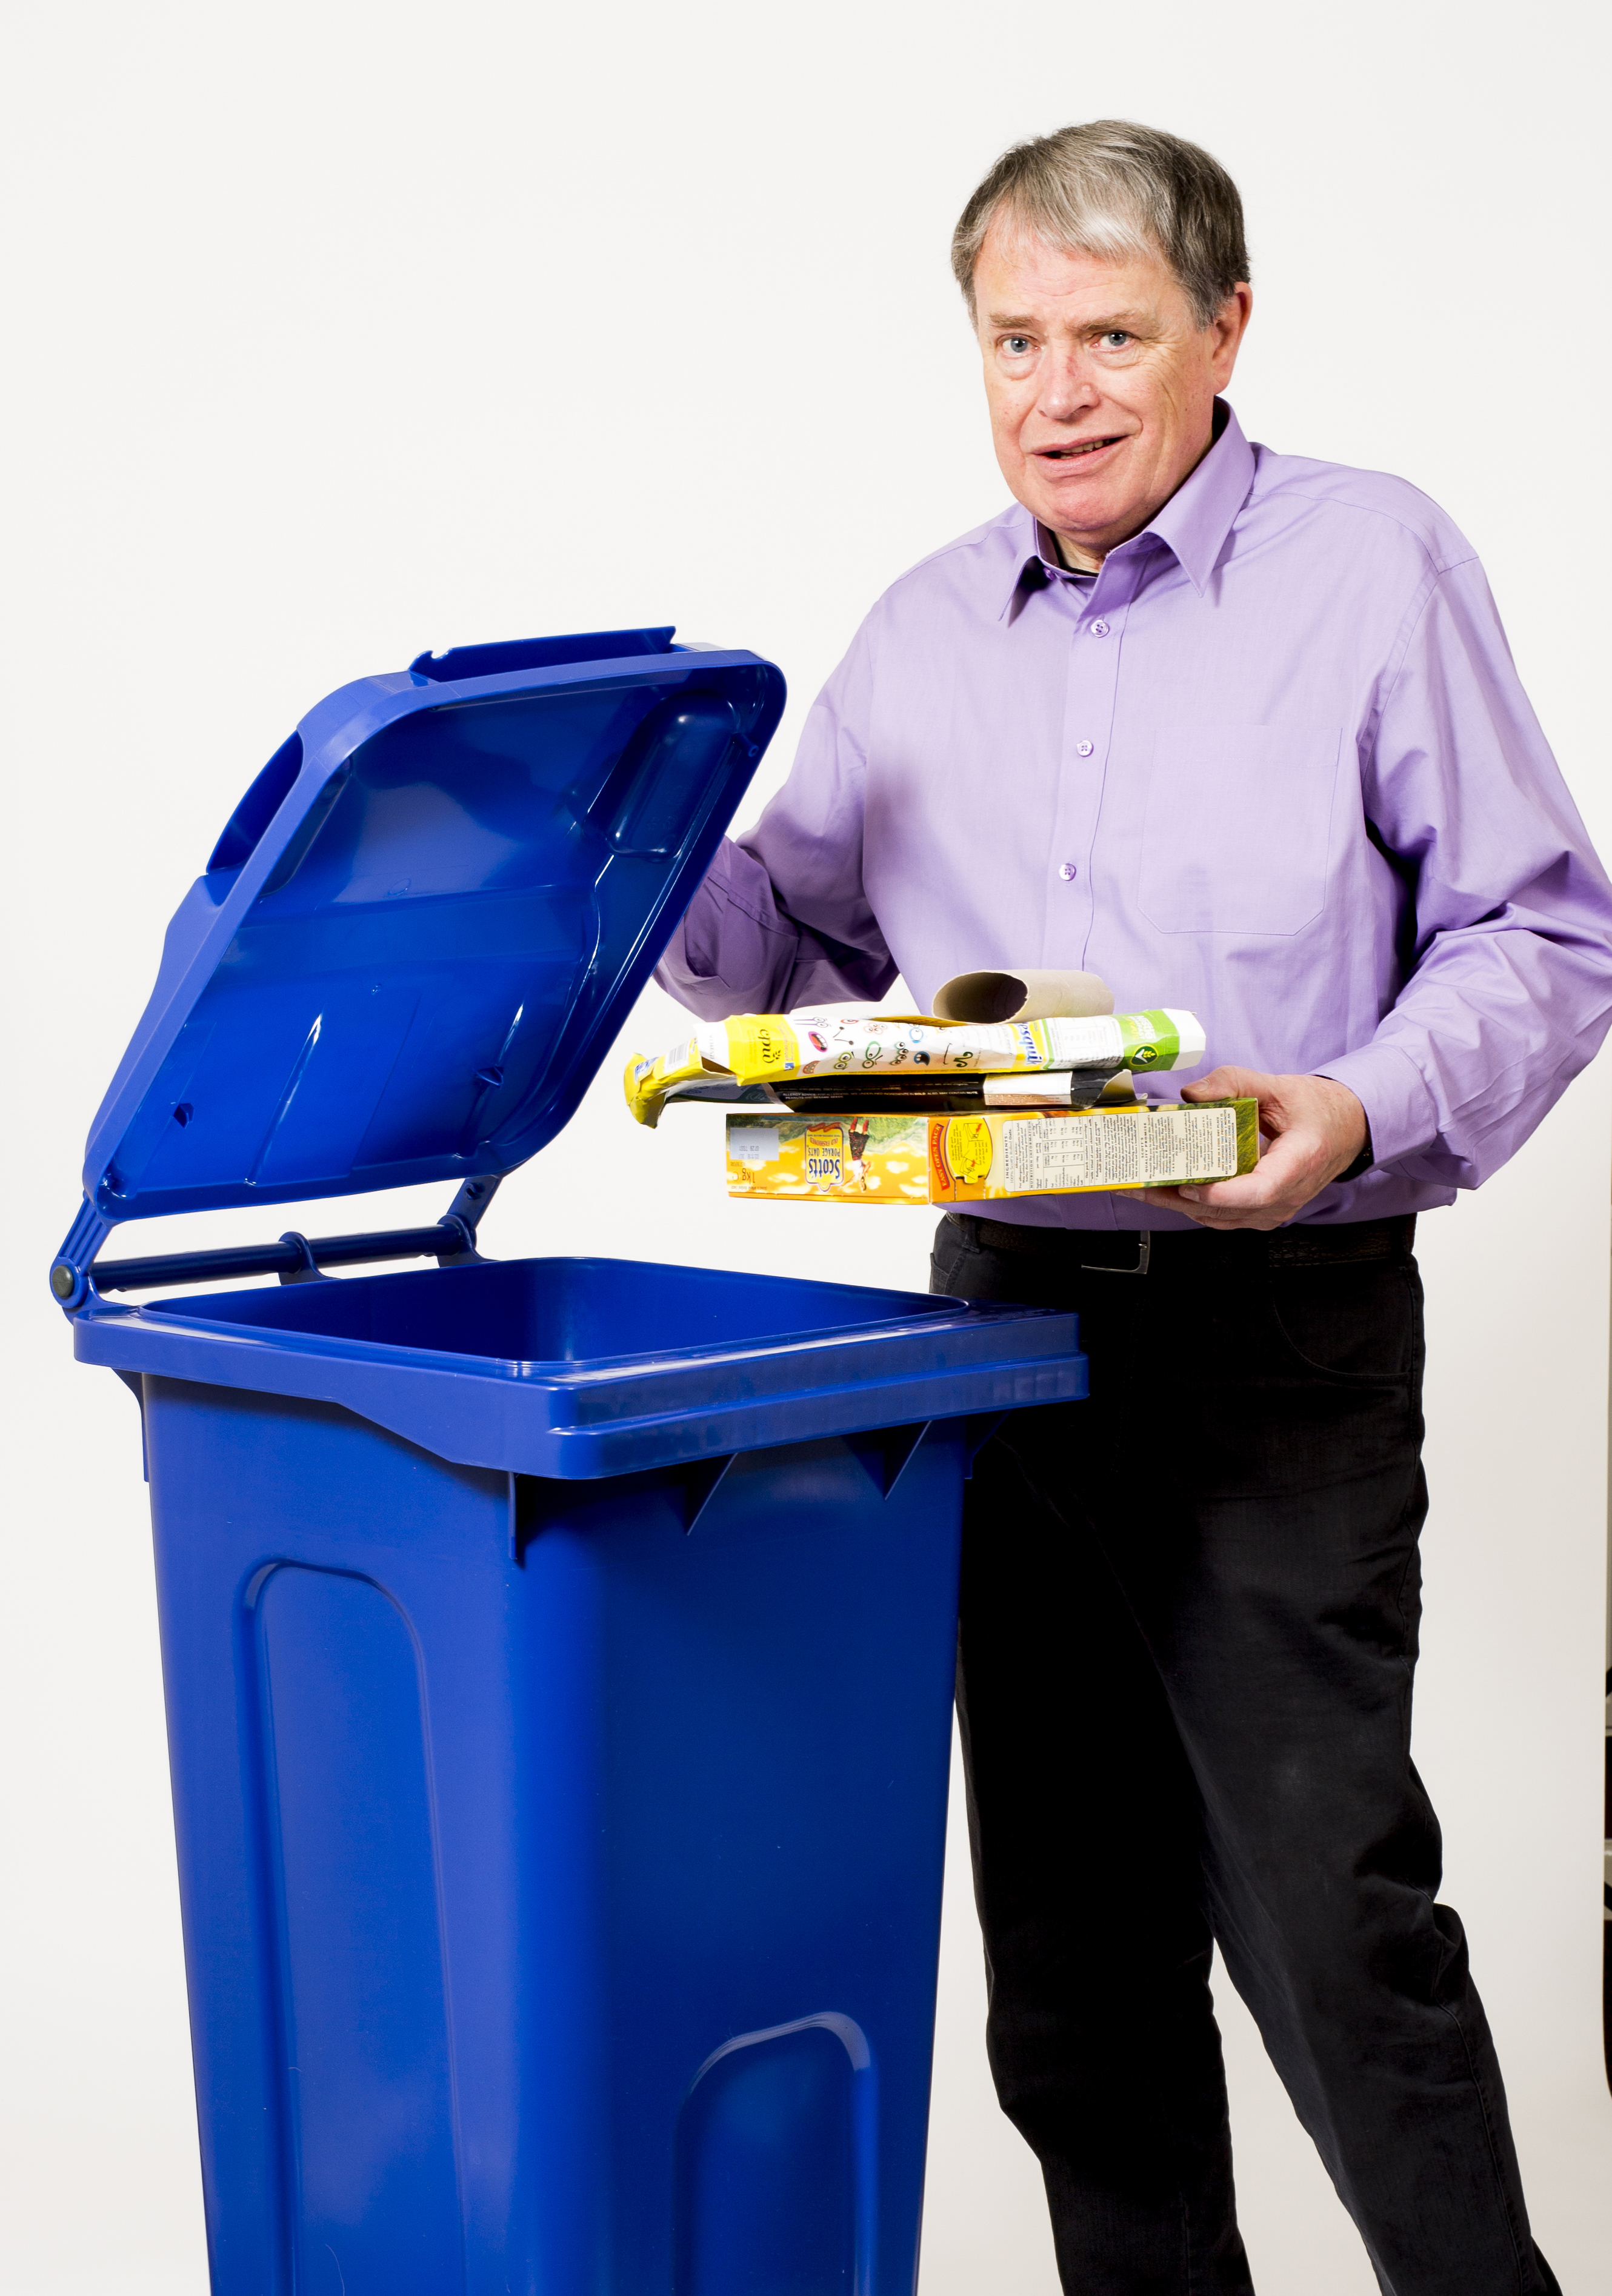 Recycling collections in Pendle are changing!